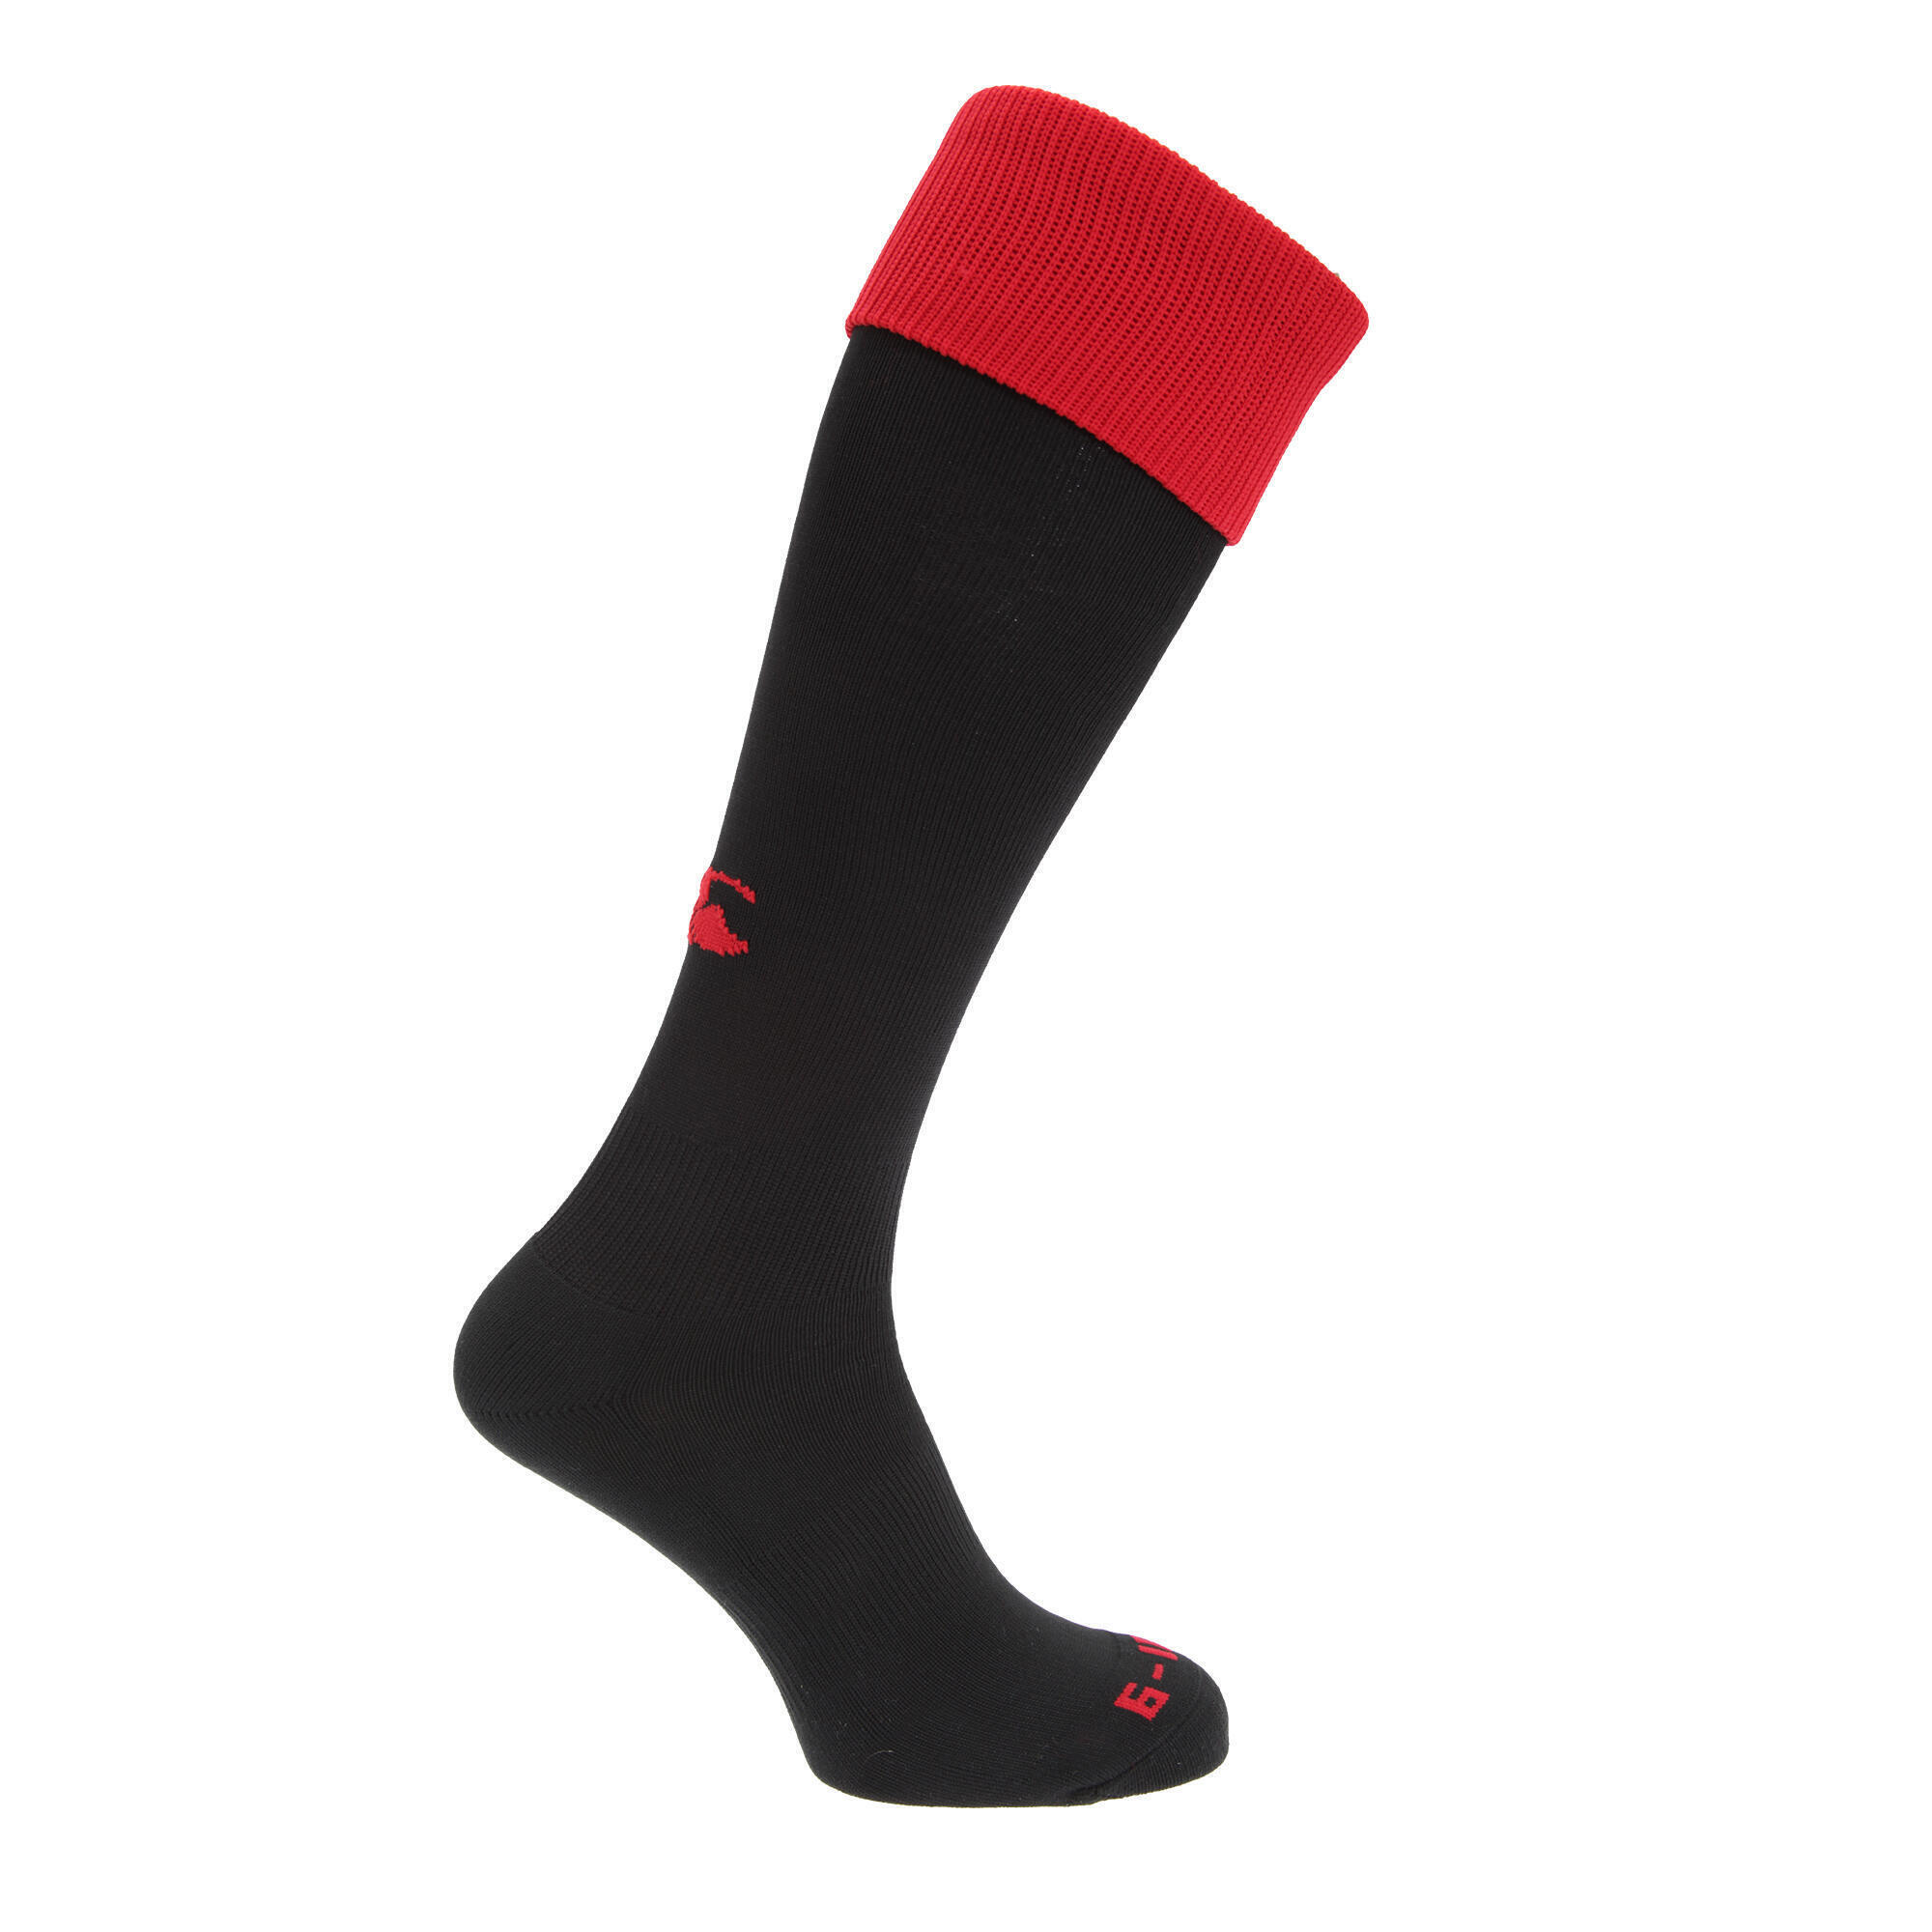 CANTERBURY Mens Playing Cap Rugby Sport Socks (Black/Red)